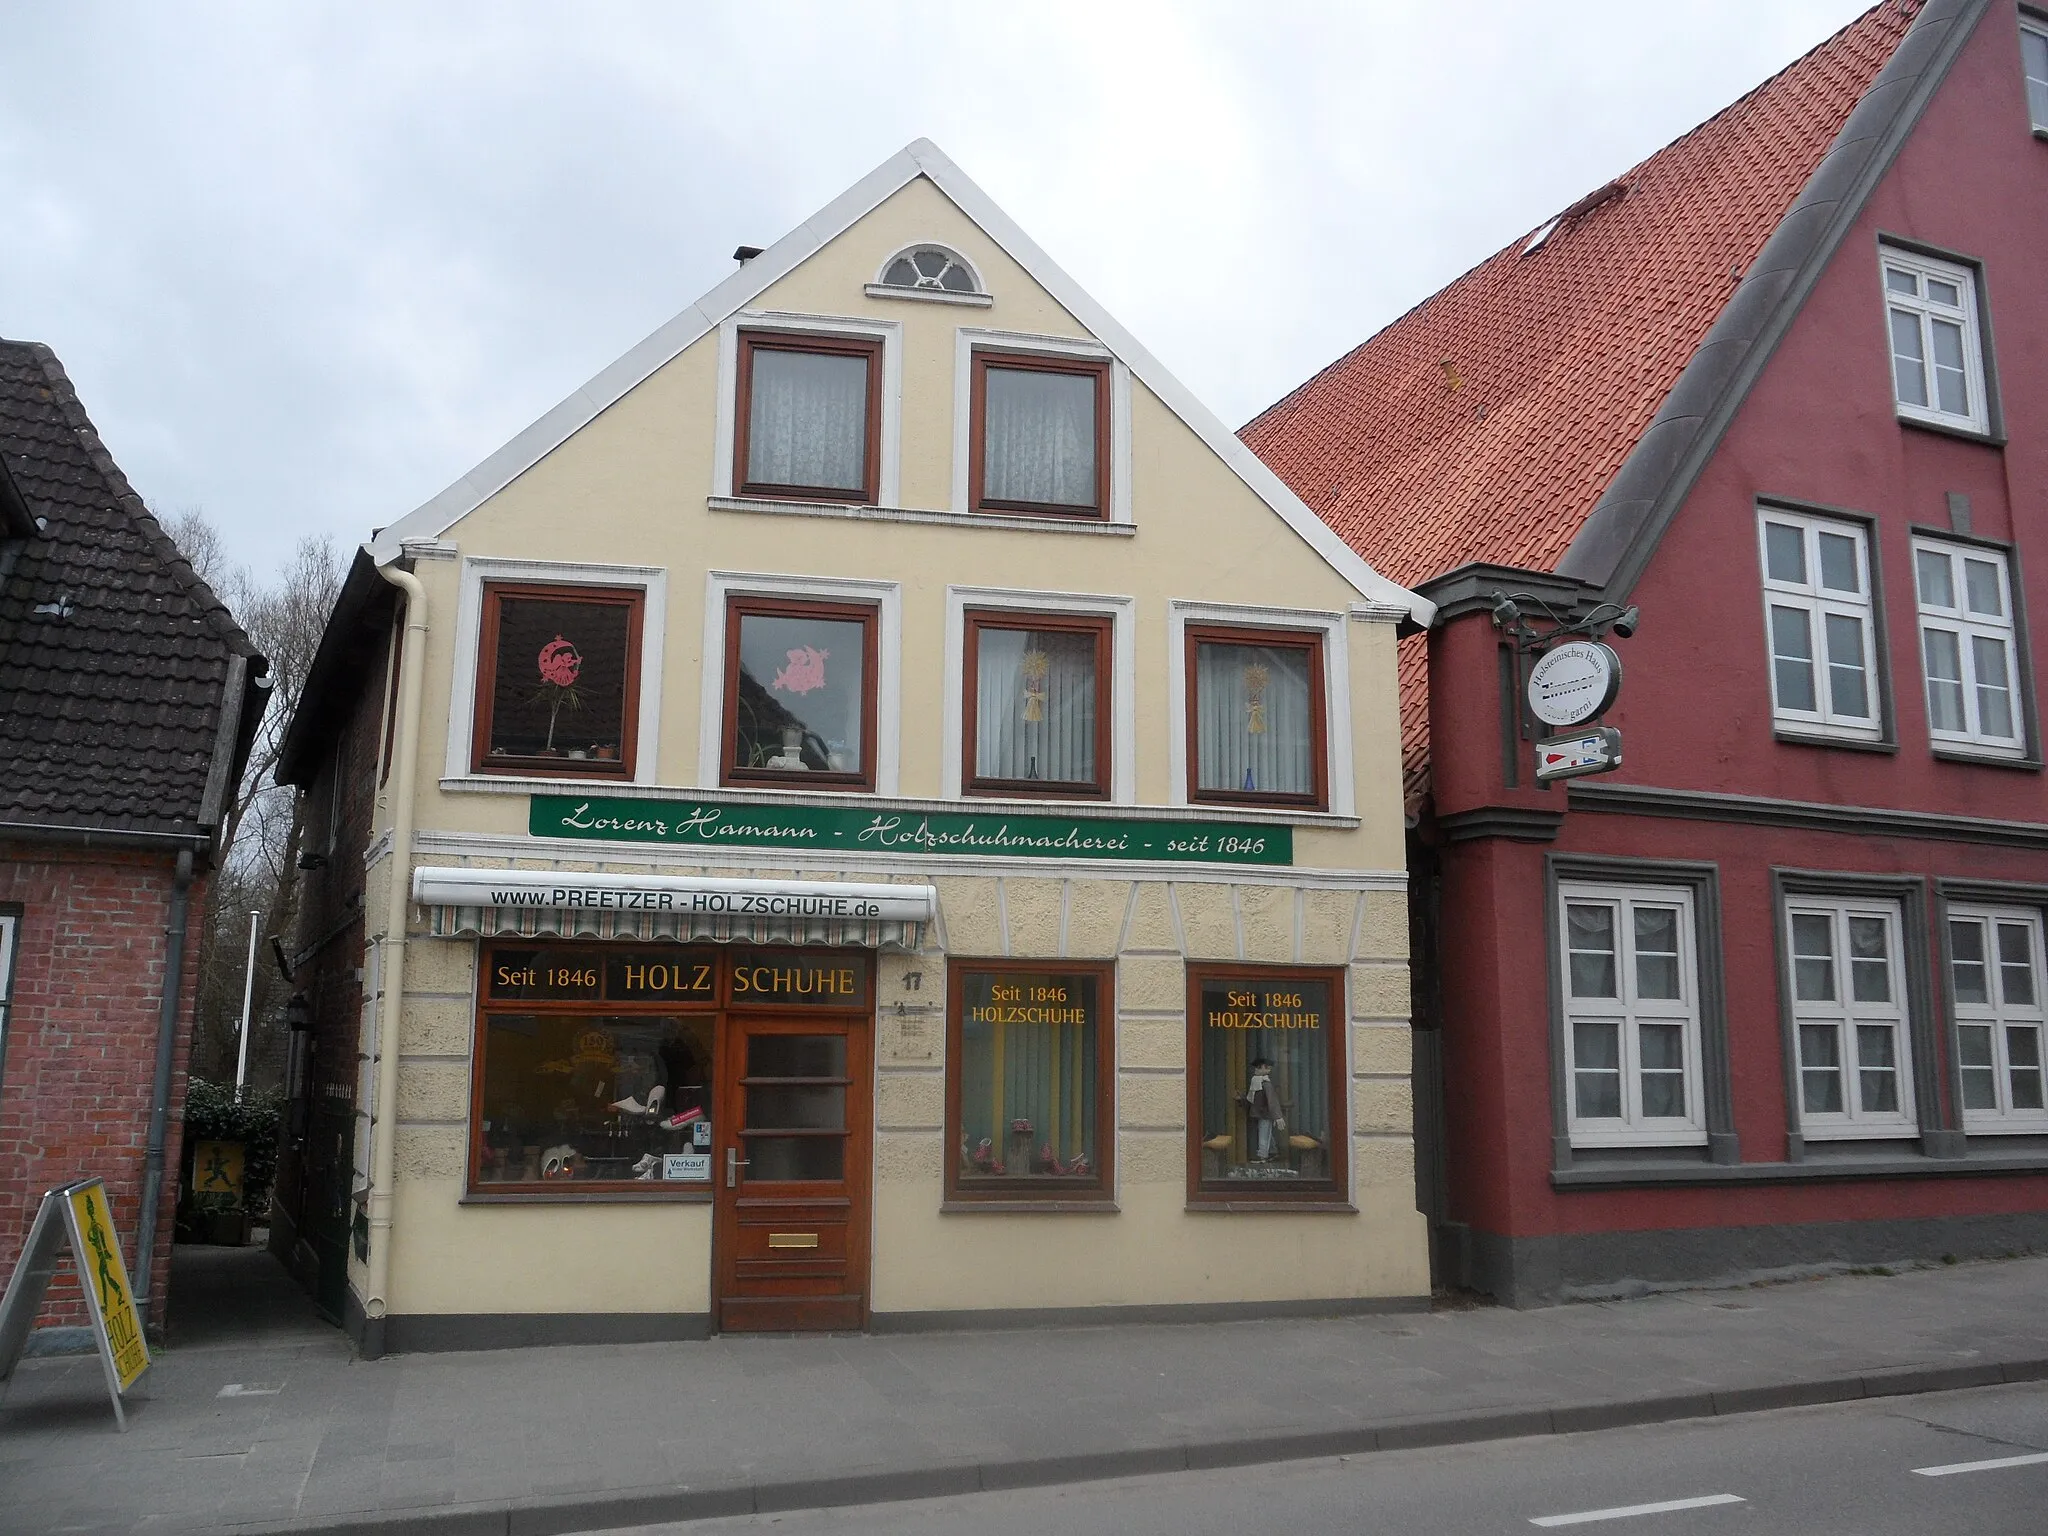 Photo showing: Shop for timber shoes (Clog) and timber shoe museum in Preetz